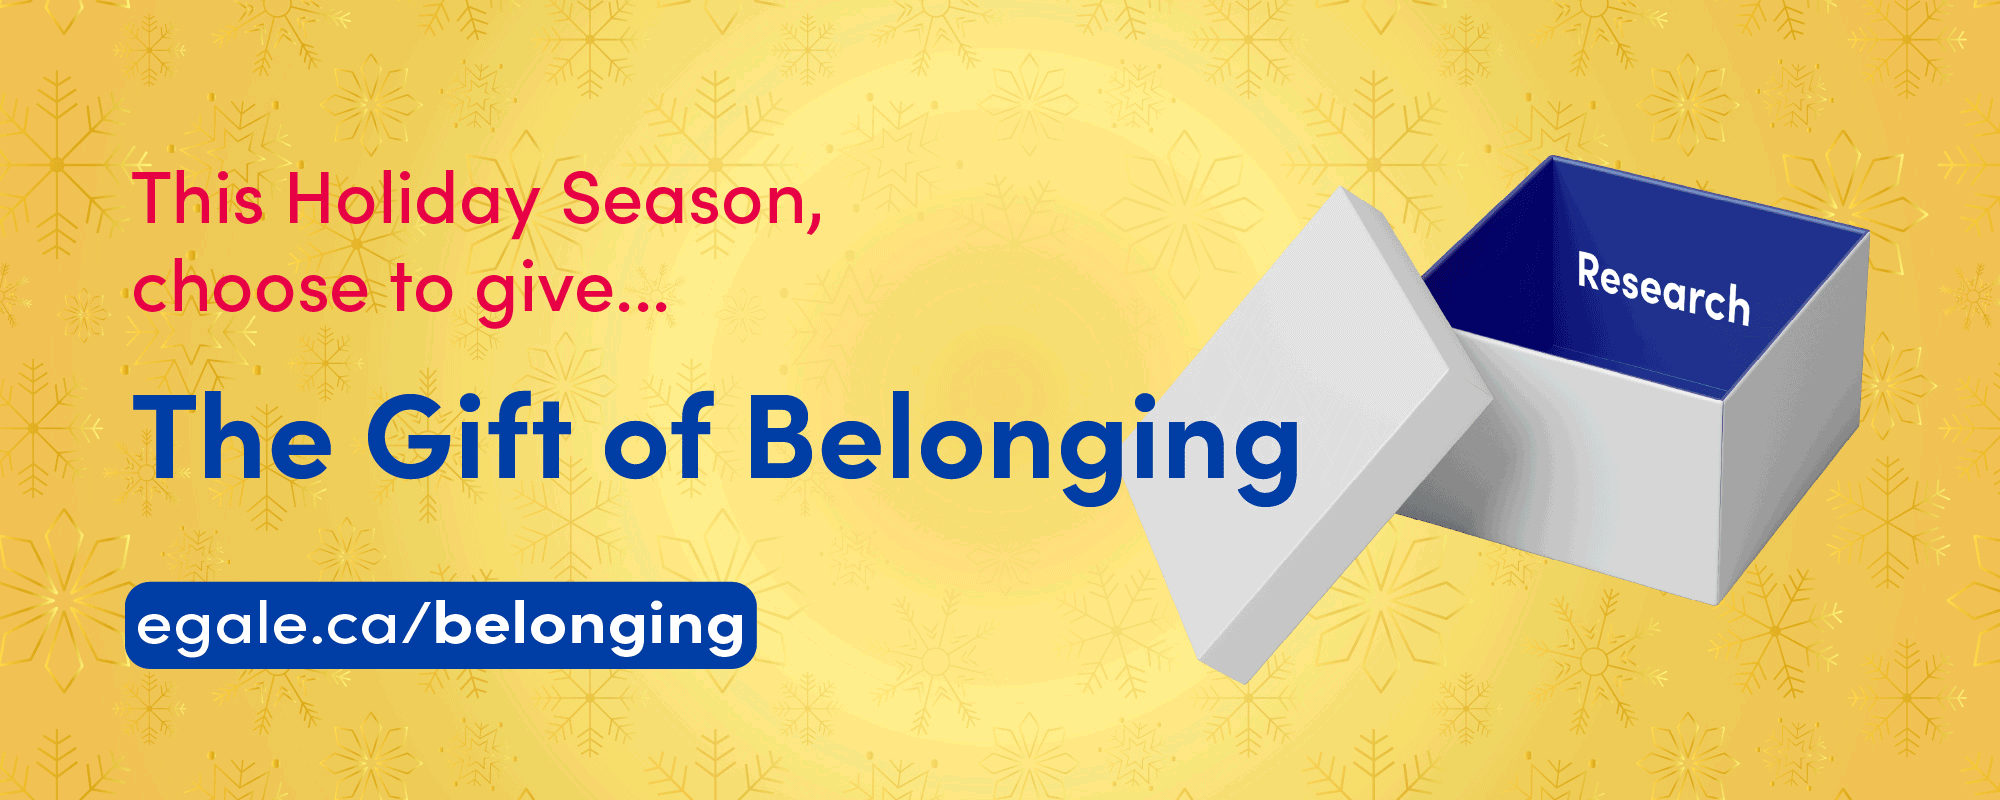 This Holiday season choose to give... the Gift of Belonging.